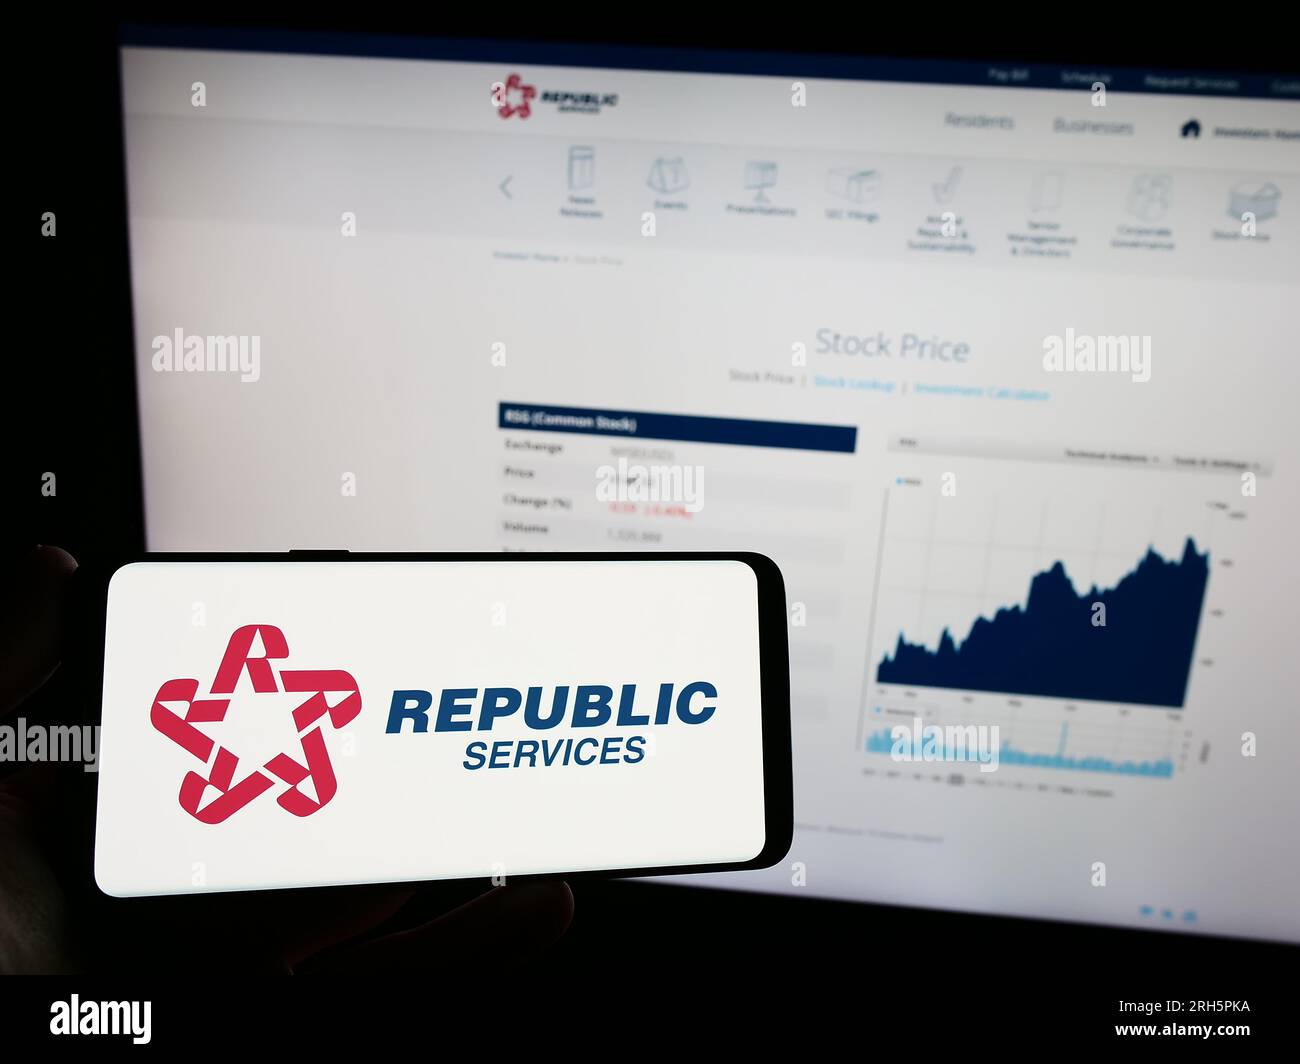 Person holding mobile phone with logo of US waste disposal company Republic Services Inc. on screen in front of web page. Focus on phone display. Stock Photo